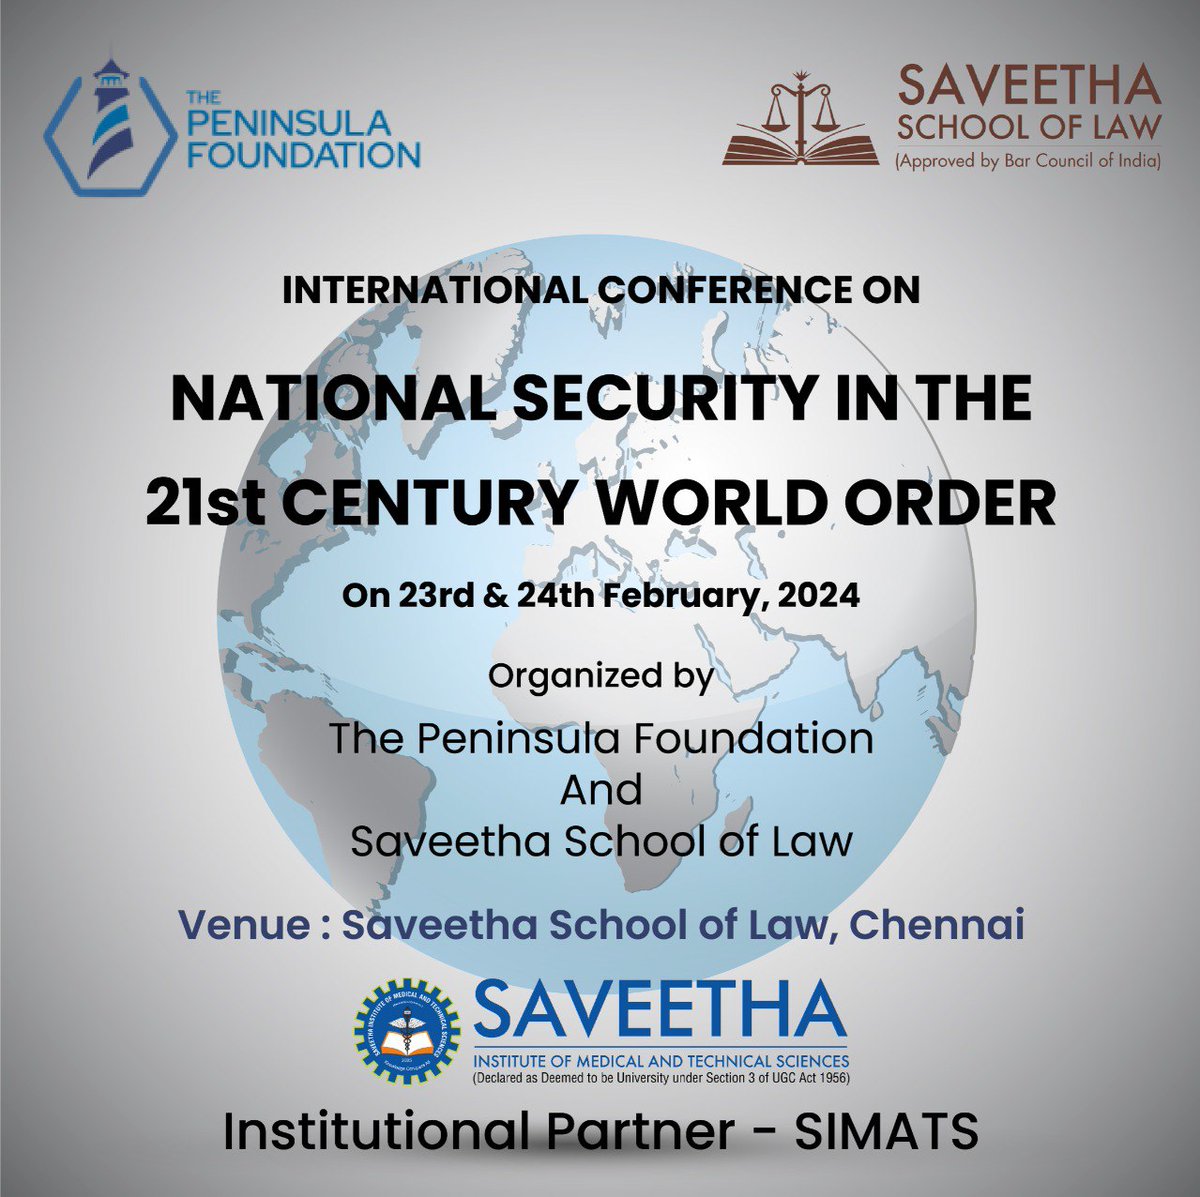 📷 Join us at the International Conference on National Security in the 21st Century World Order! 

📷 Date: 23rd & 24th February 2024
📷 Venue: Saveetha School of Law

#NationalSecurityConference #GlobalGovernance #SaveethaLawSchool #PeninsulaFoundation #ScholarlyExchange